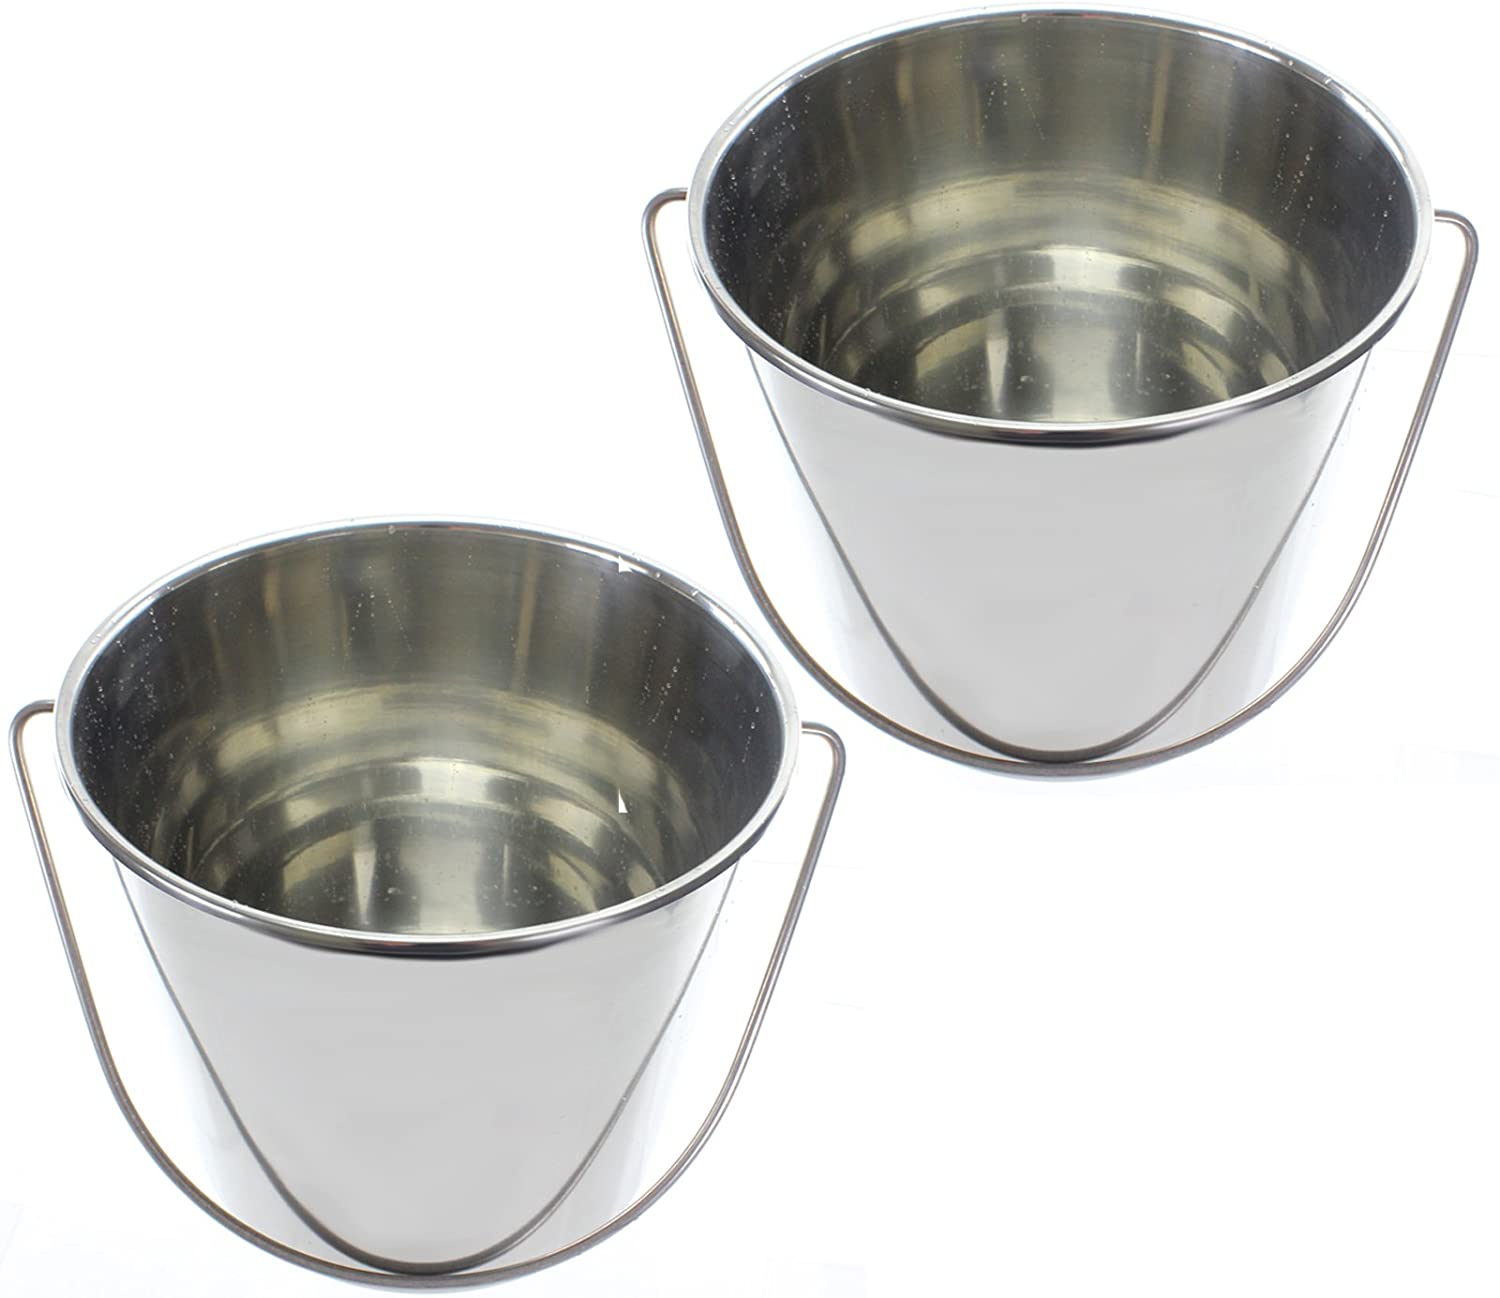 12 Litre Feed Feeding Watering Bucket for Horse Equestrian Stable (Pack of 2)